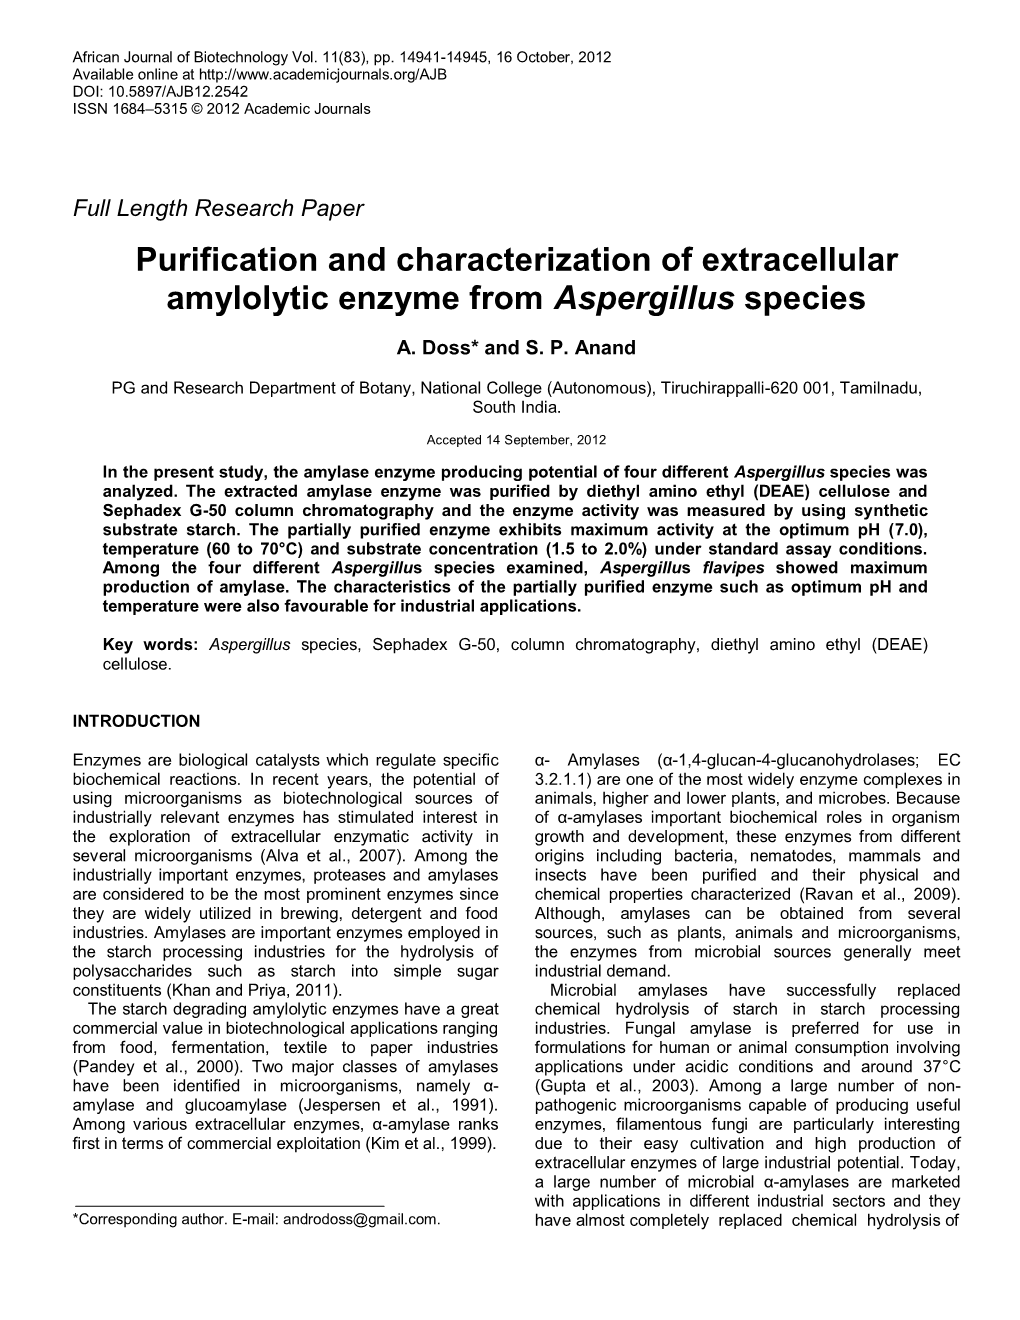 Purification and Characterization of Extracellular Amylolytic Enzyme from Aspergillus Species